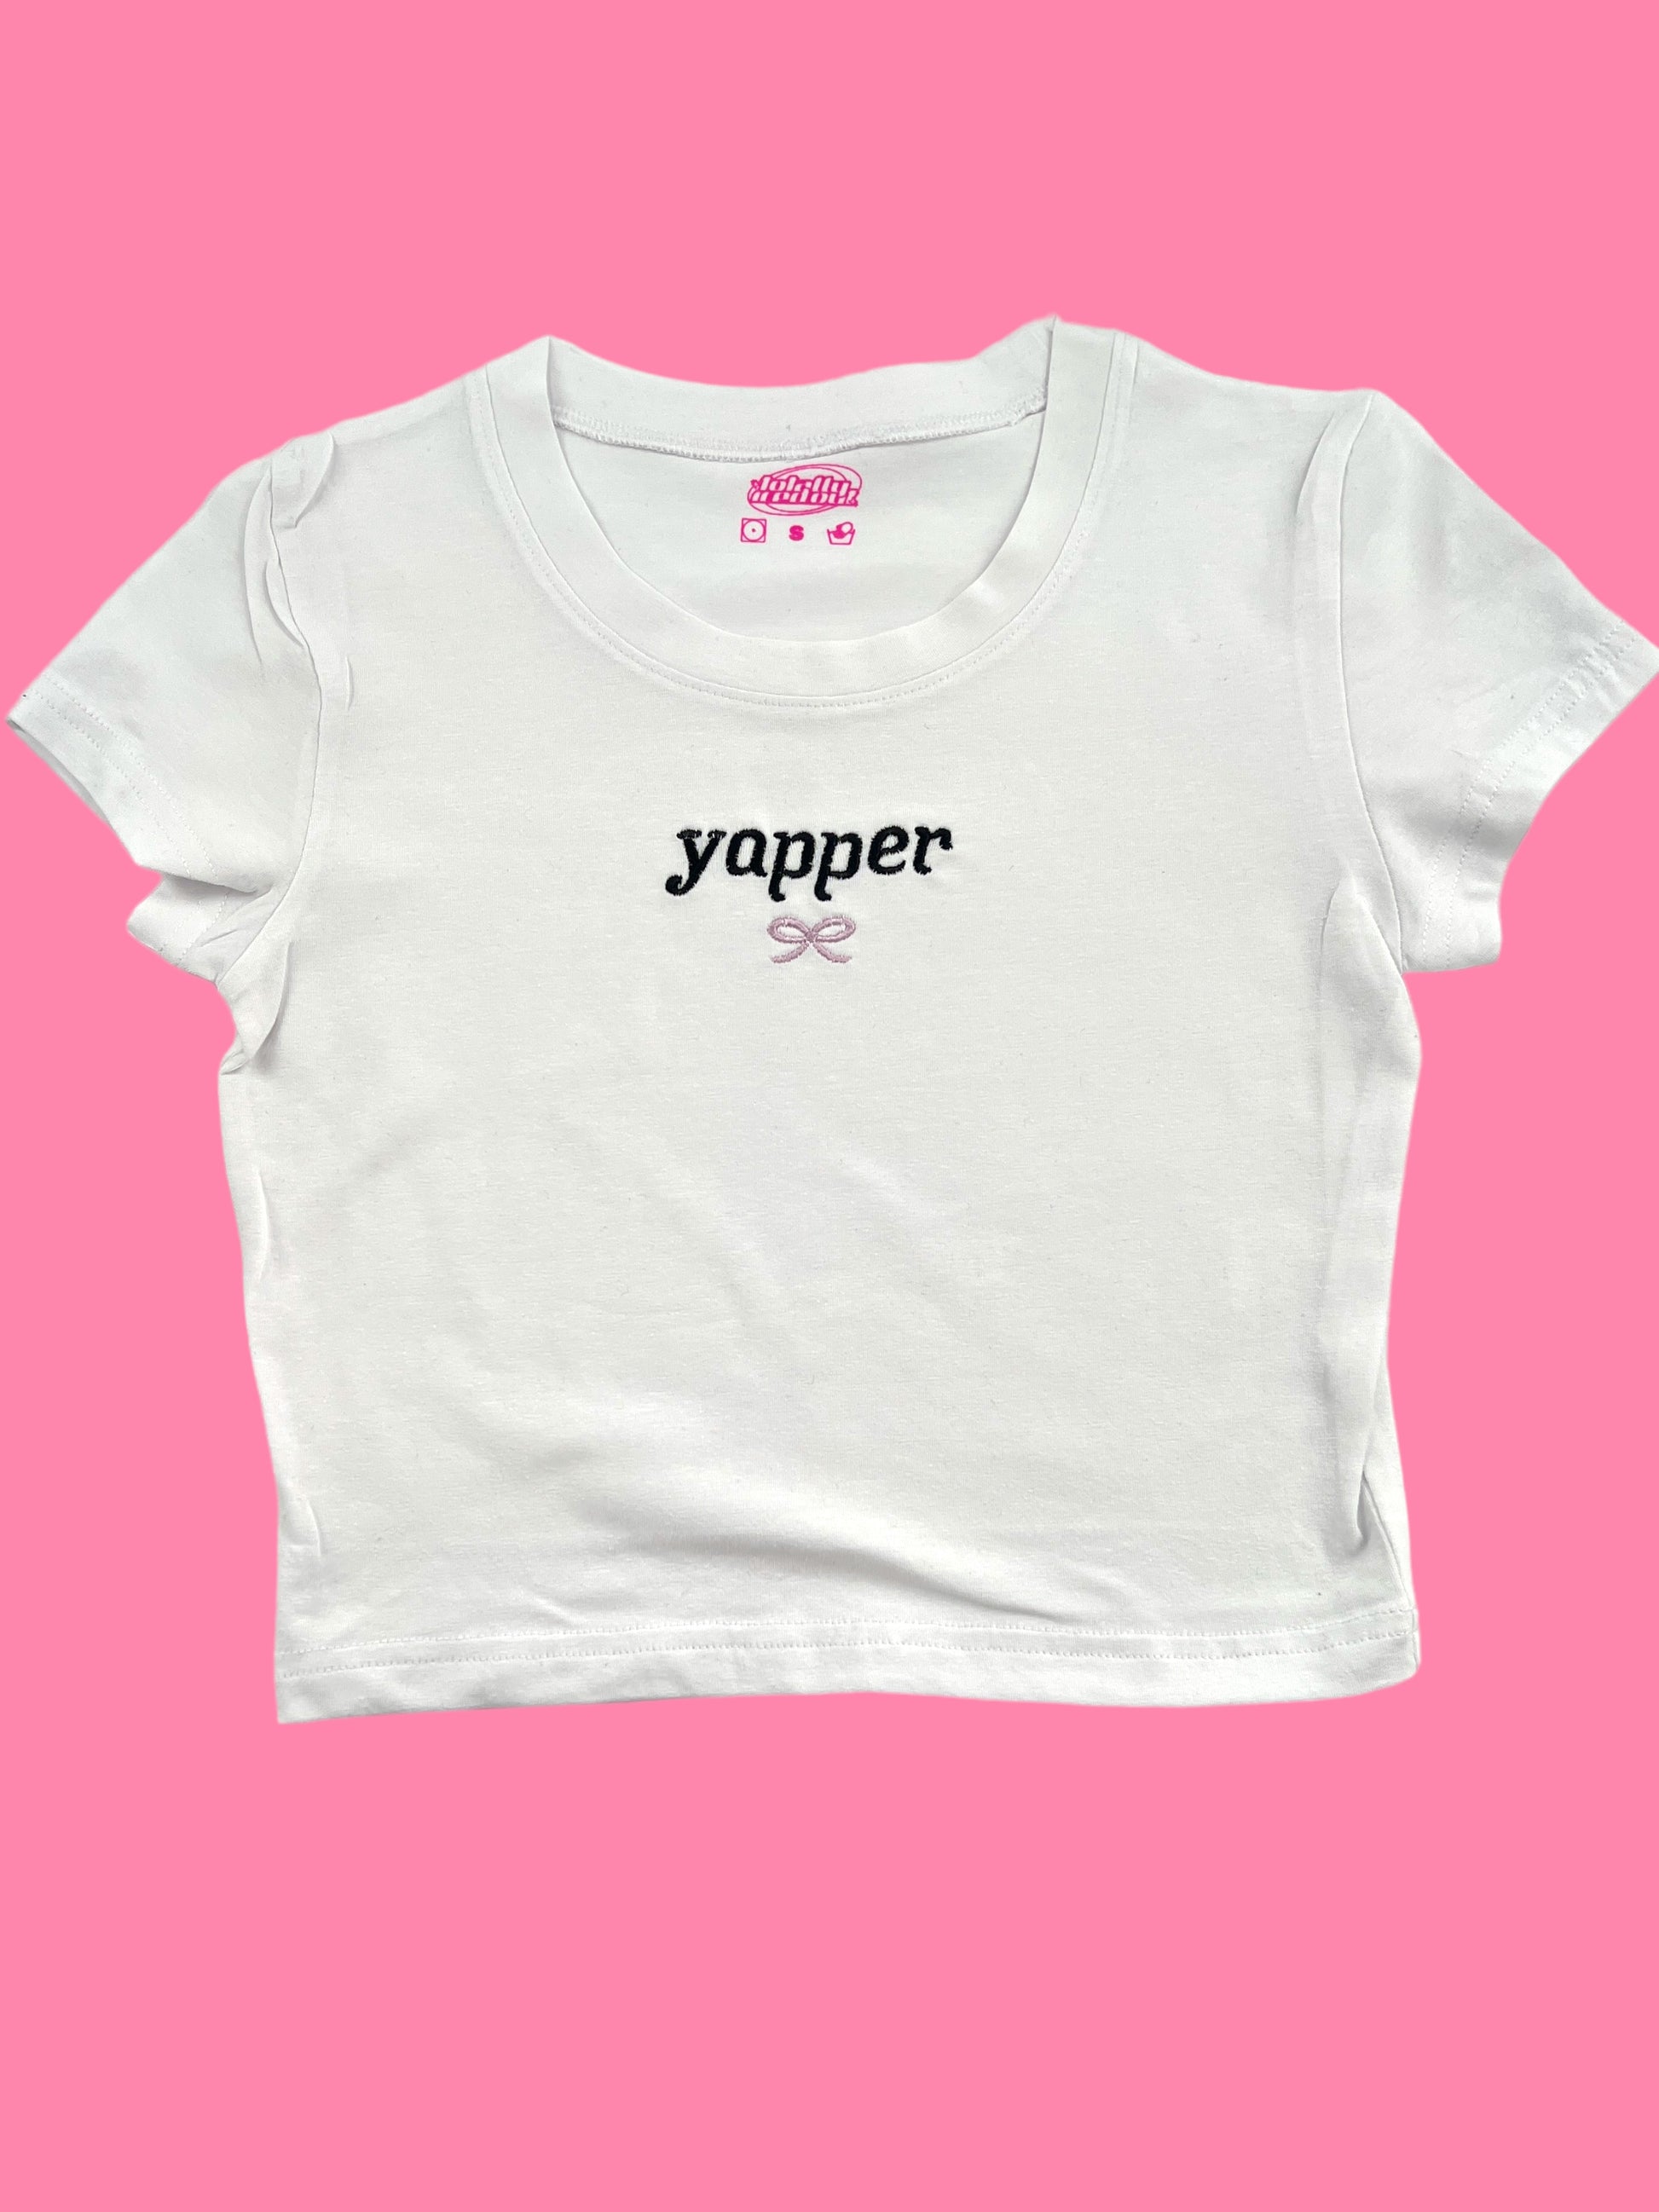 a white t - shirt with the word yapper printed on it